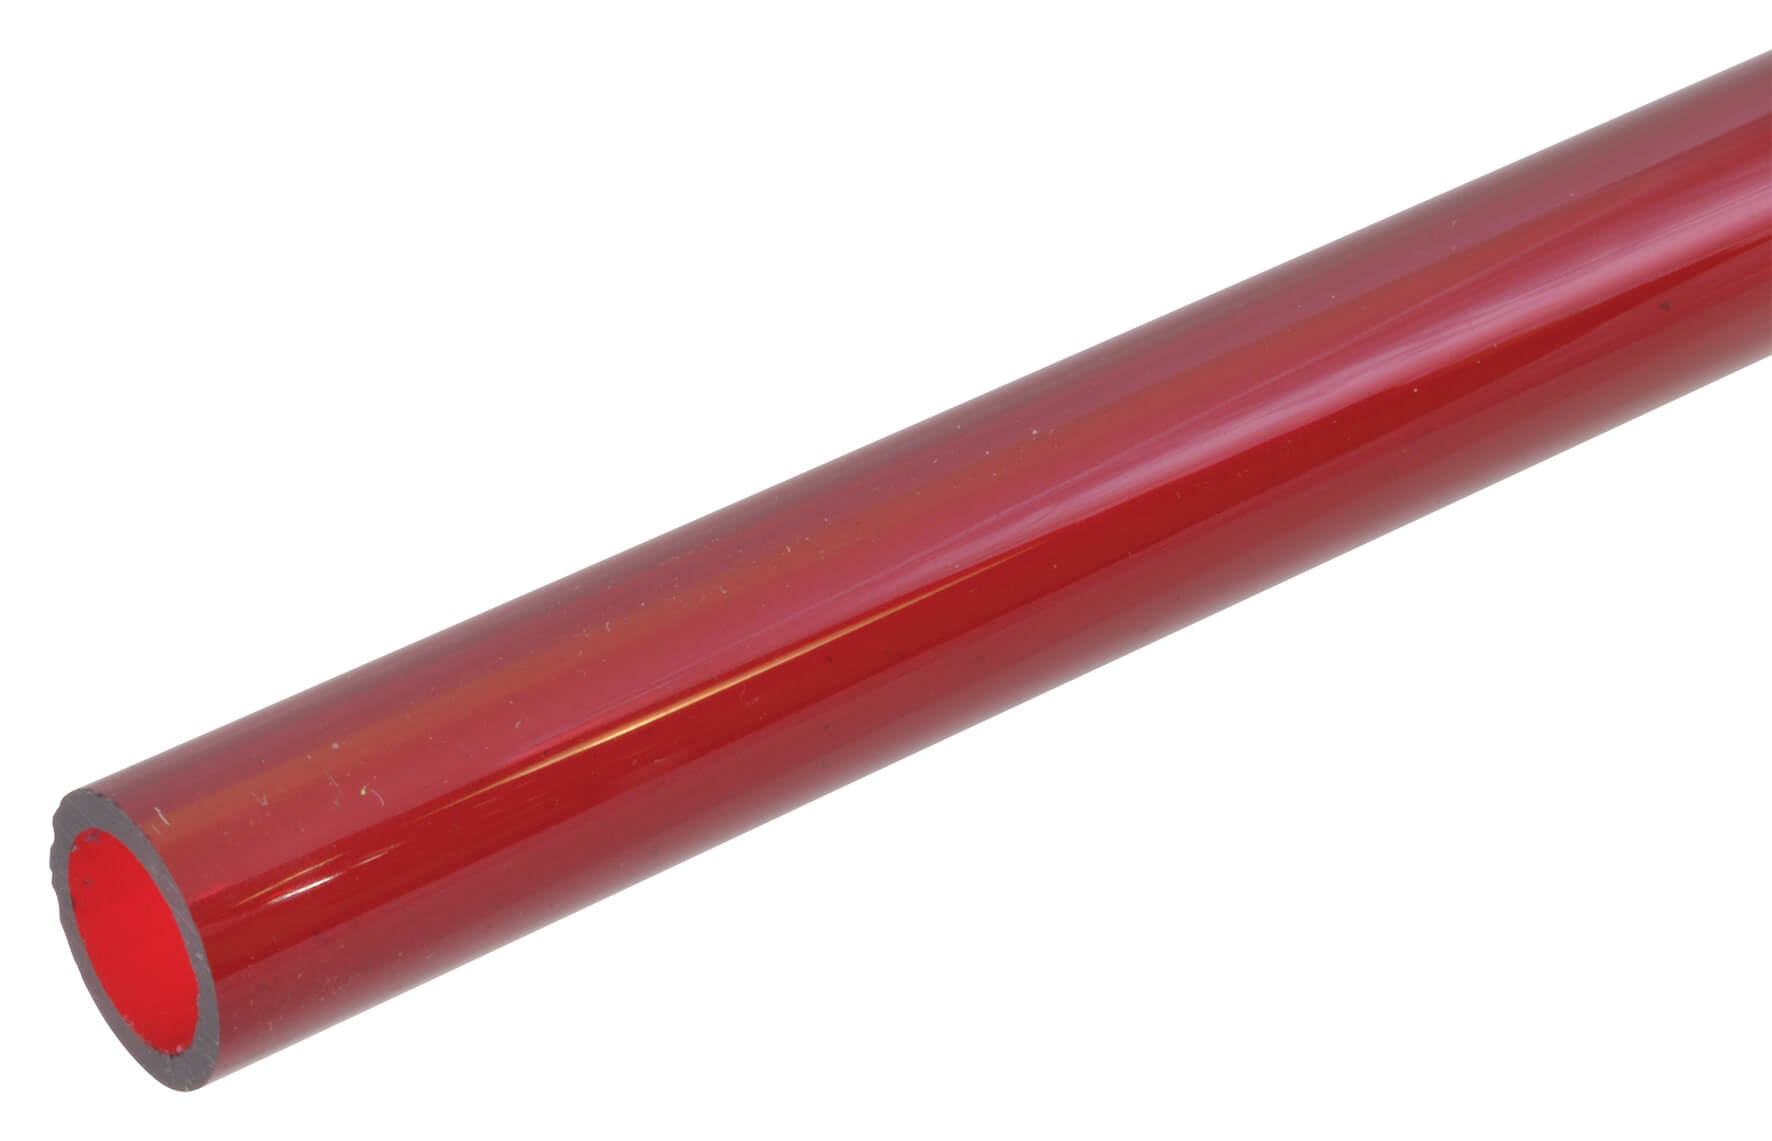 Transparent Acrylic Tube 9.5/6.4mm x 610mm - Red